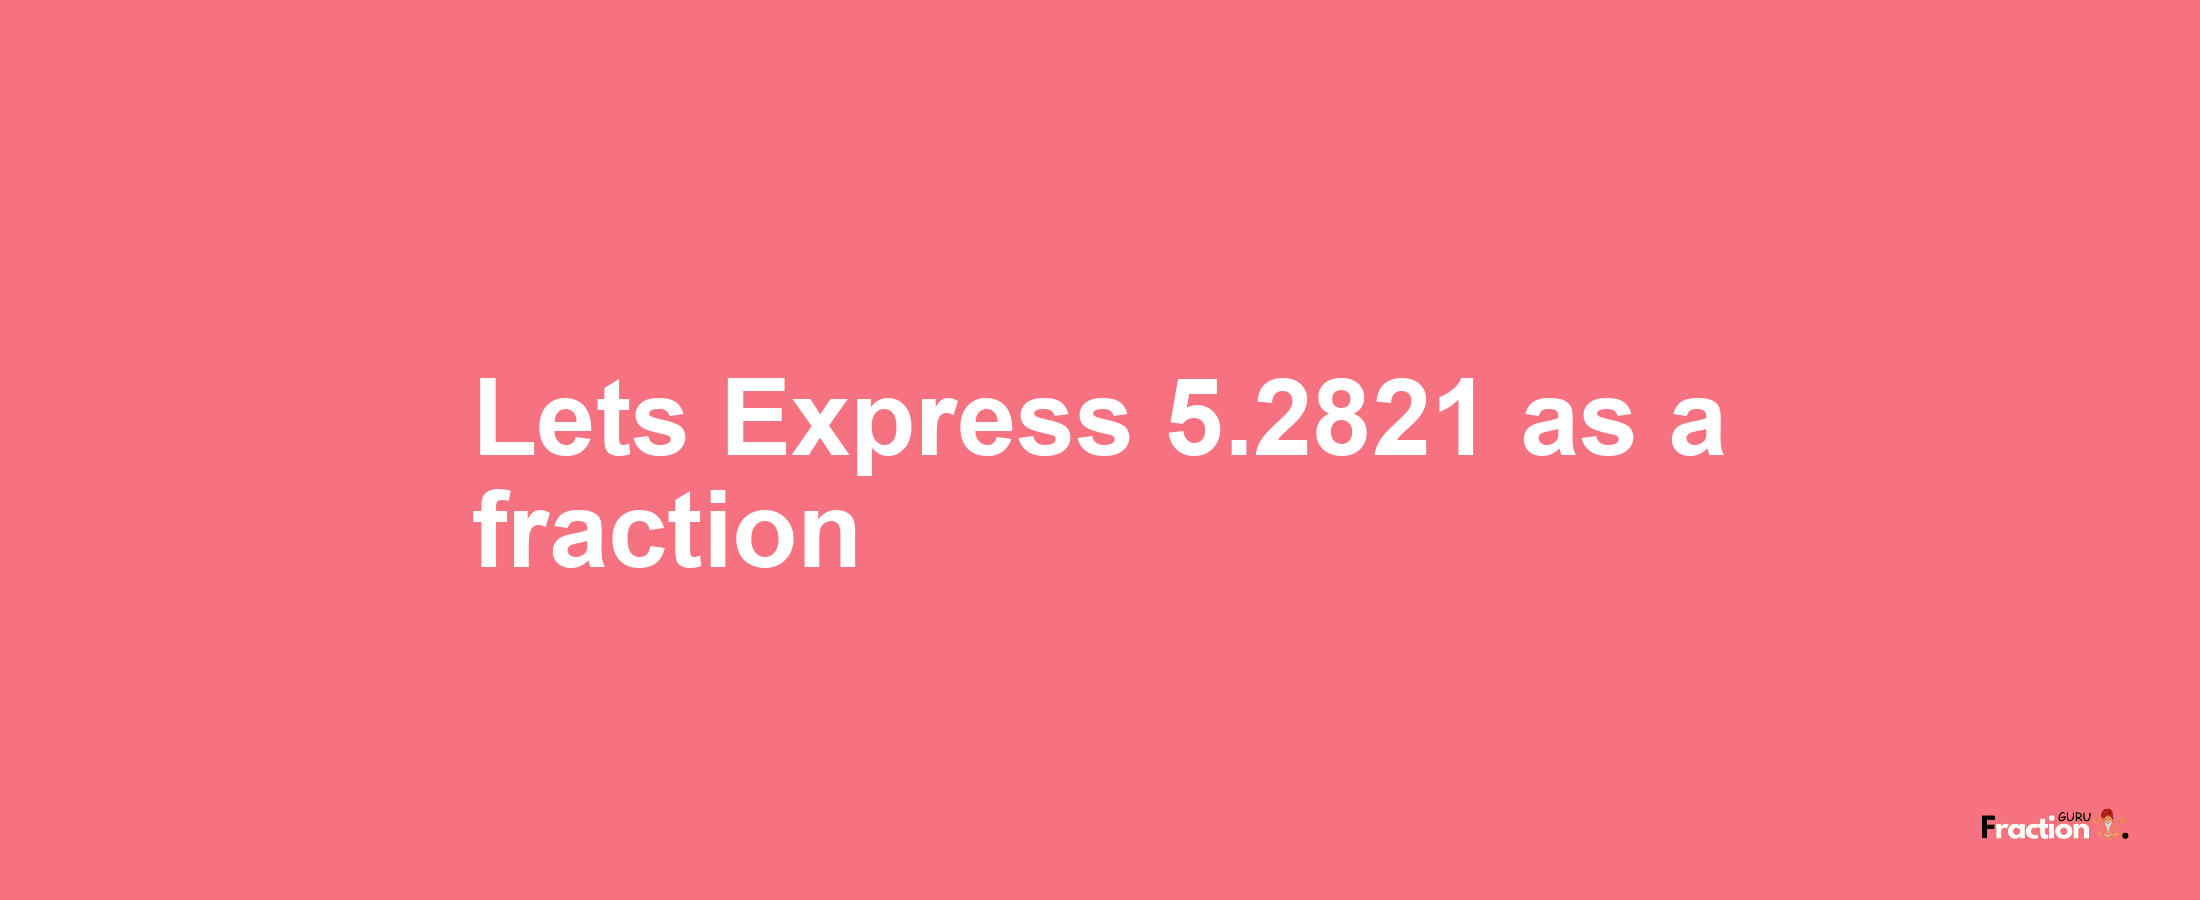 Lets Express 5.2821 as afraction